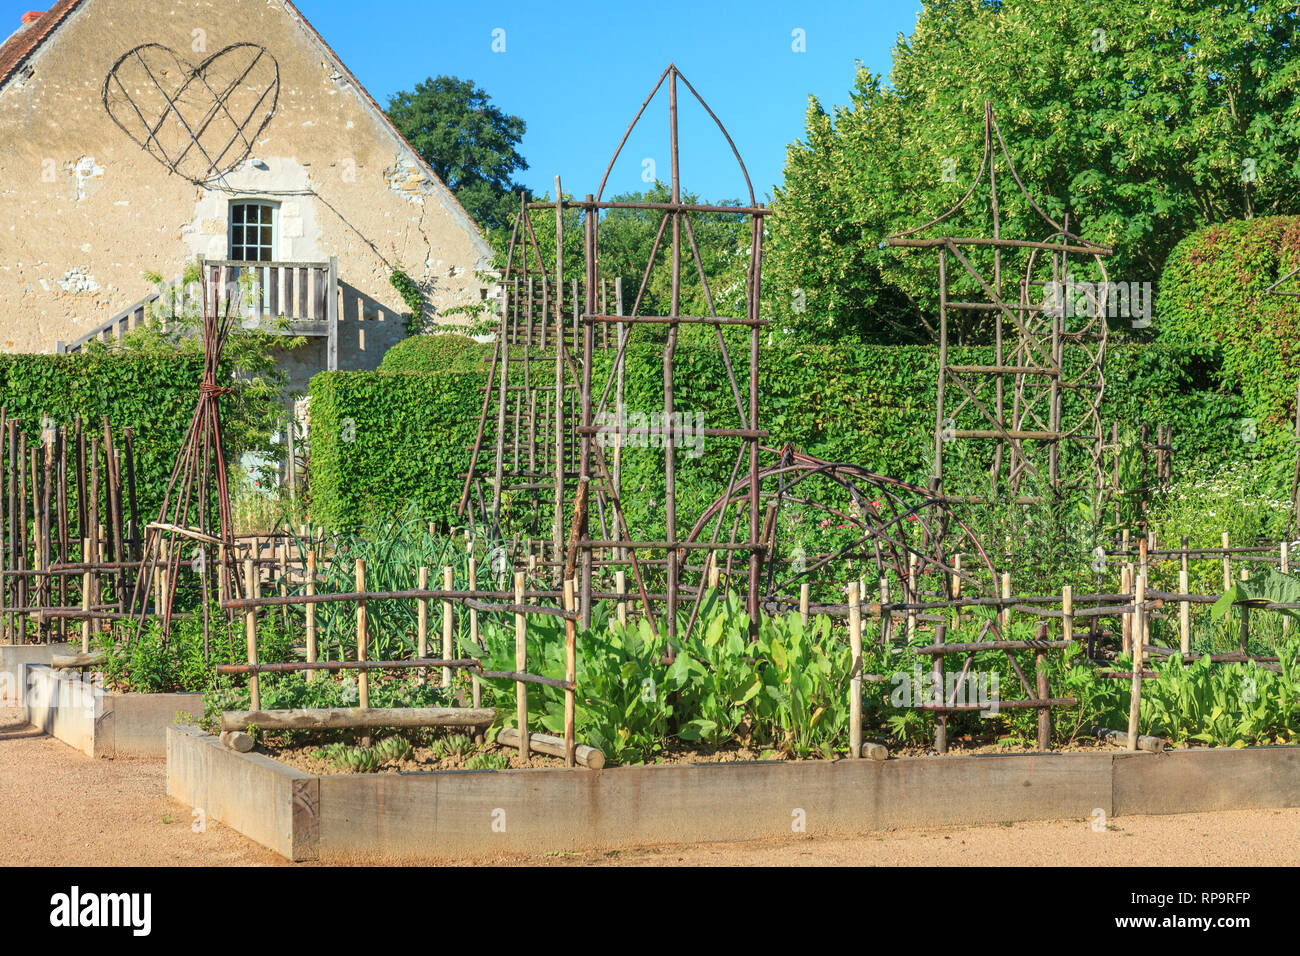 Orsan priory garden, France : the Simples Garden, medicinal herb garden with sweet chestnut tree structures (obligatory mention of the garden name and Stock Photo